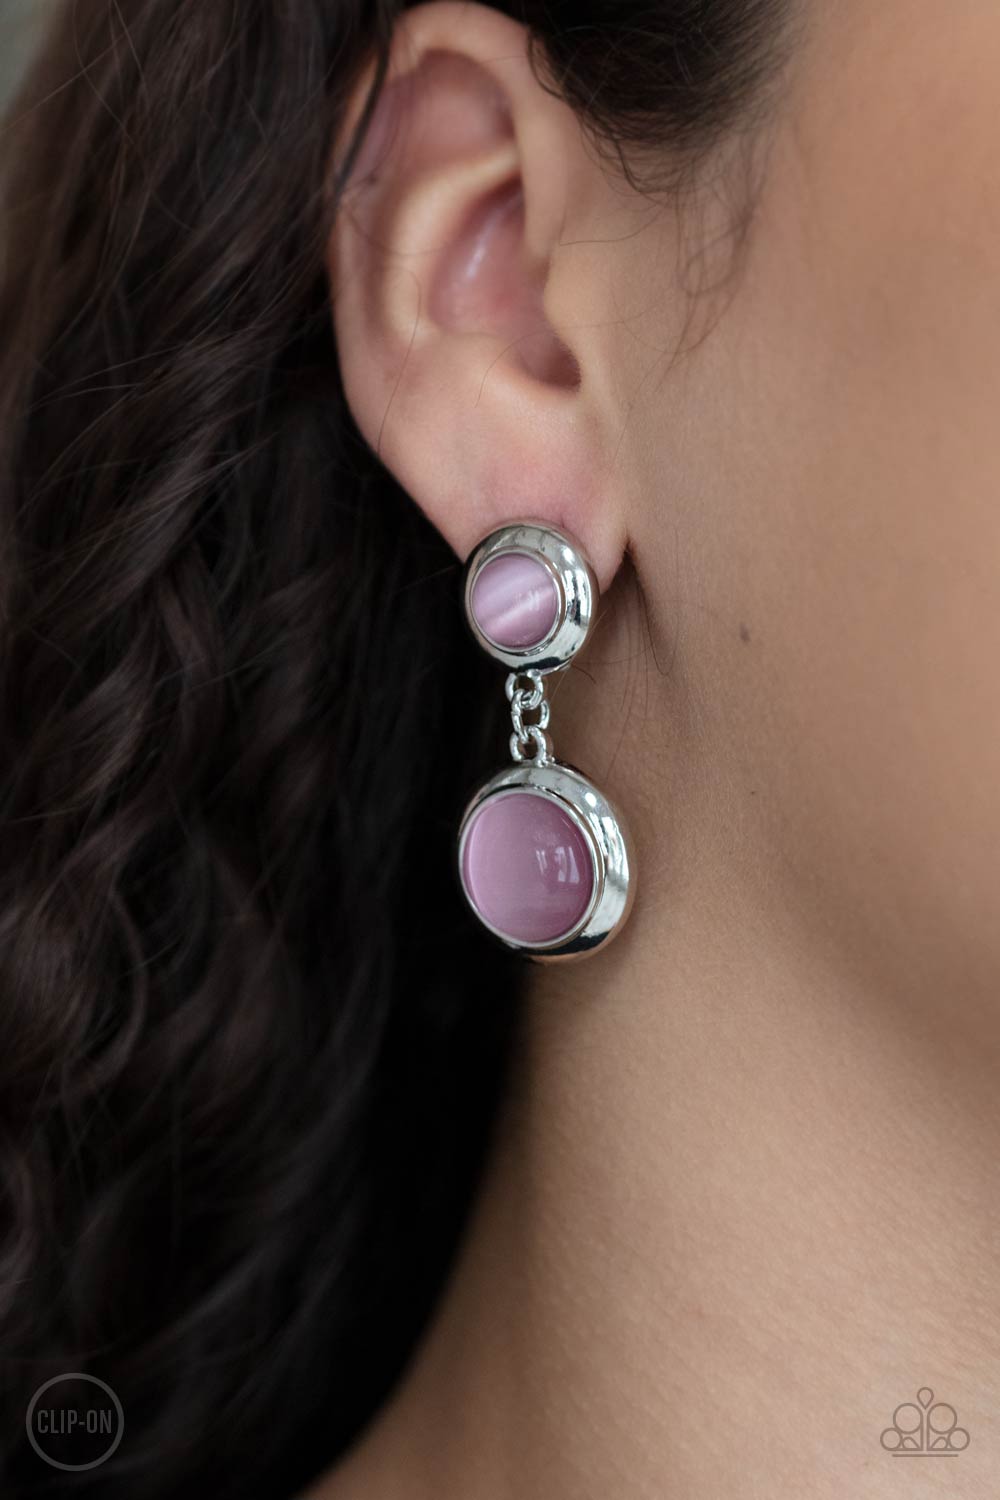 Subtle Smolder Pink Clip-On Earring - Paparazzi Accessories  Encased in sleek silver fittings, two pink cat's eye stones link into a whimsical lure. Earring attaches to a standard clip-on fitting.  All Paparazzi Accessories are lead free and nickel free!  Sold as one pair of clip-on earrings.